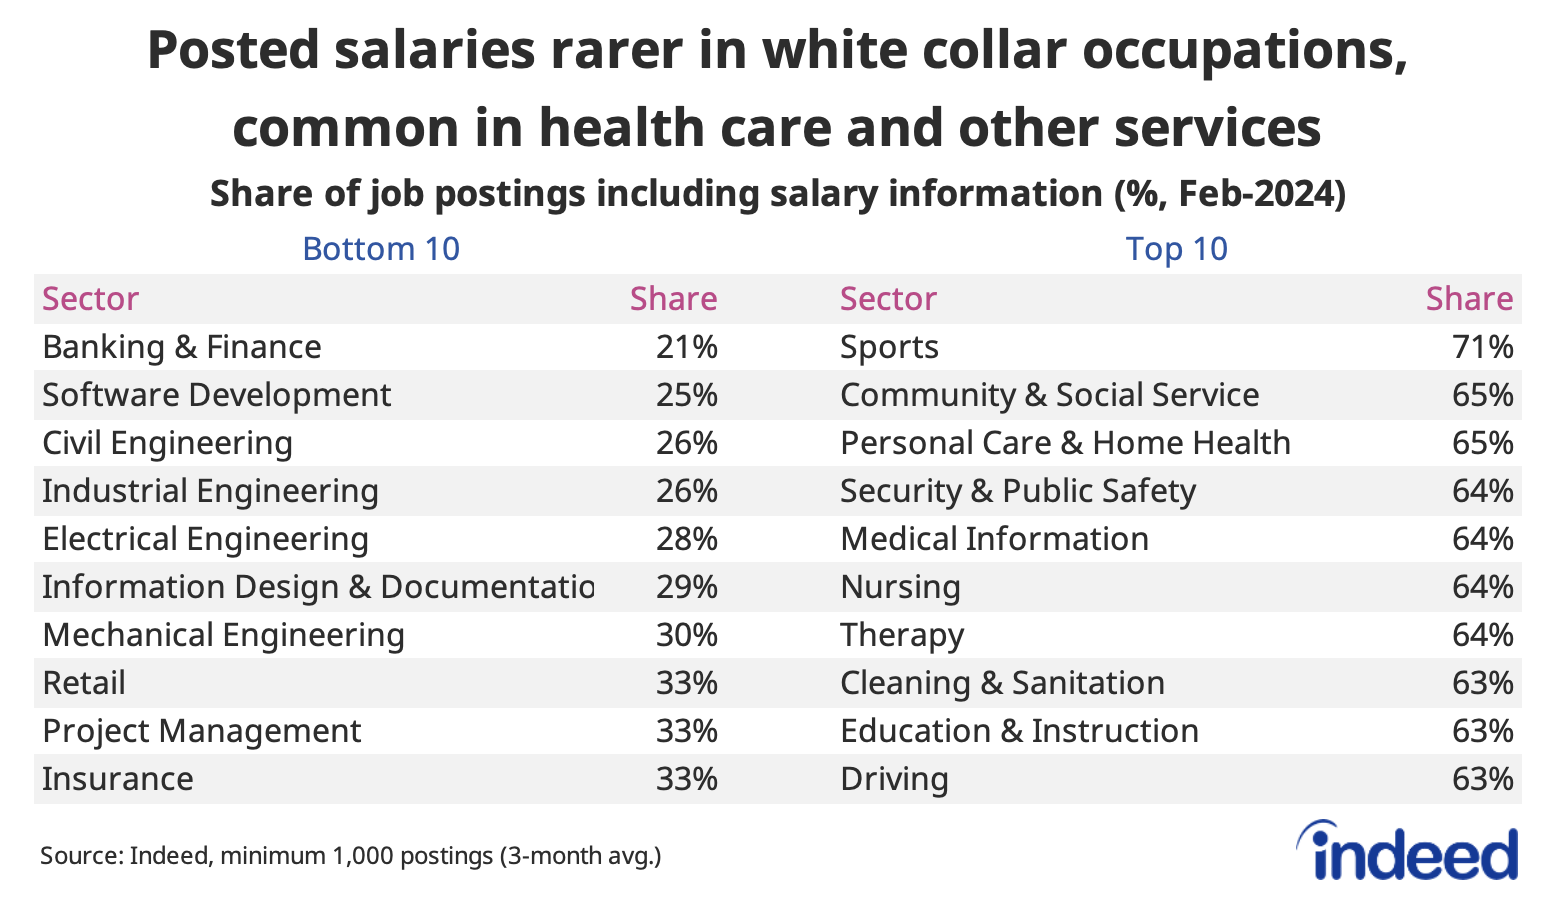 Table titled “Posted salaries rarer in white collar occupations, common in health care and other services,” shows the top-10 and bottom-10 occupations by share of Canadian job postings including salary information, as of February 2024. Less than a third of postings for a range of white collar jobs include pay, while over 60% in several health care and service sector positions do. 